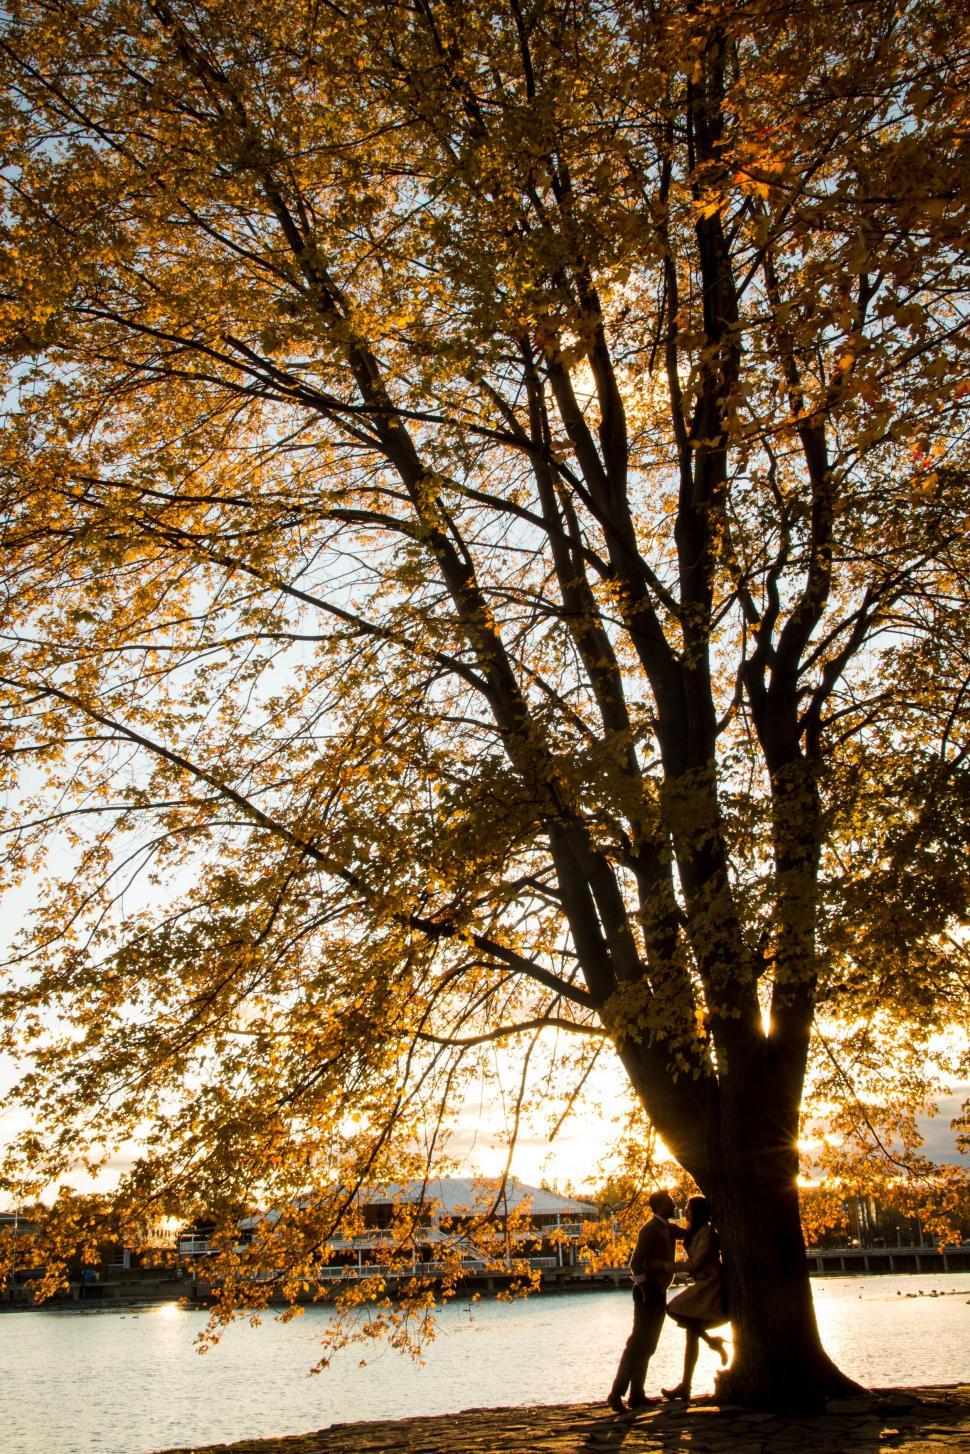 Free Image of Two People Sitting on a Bench Under a Tree 